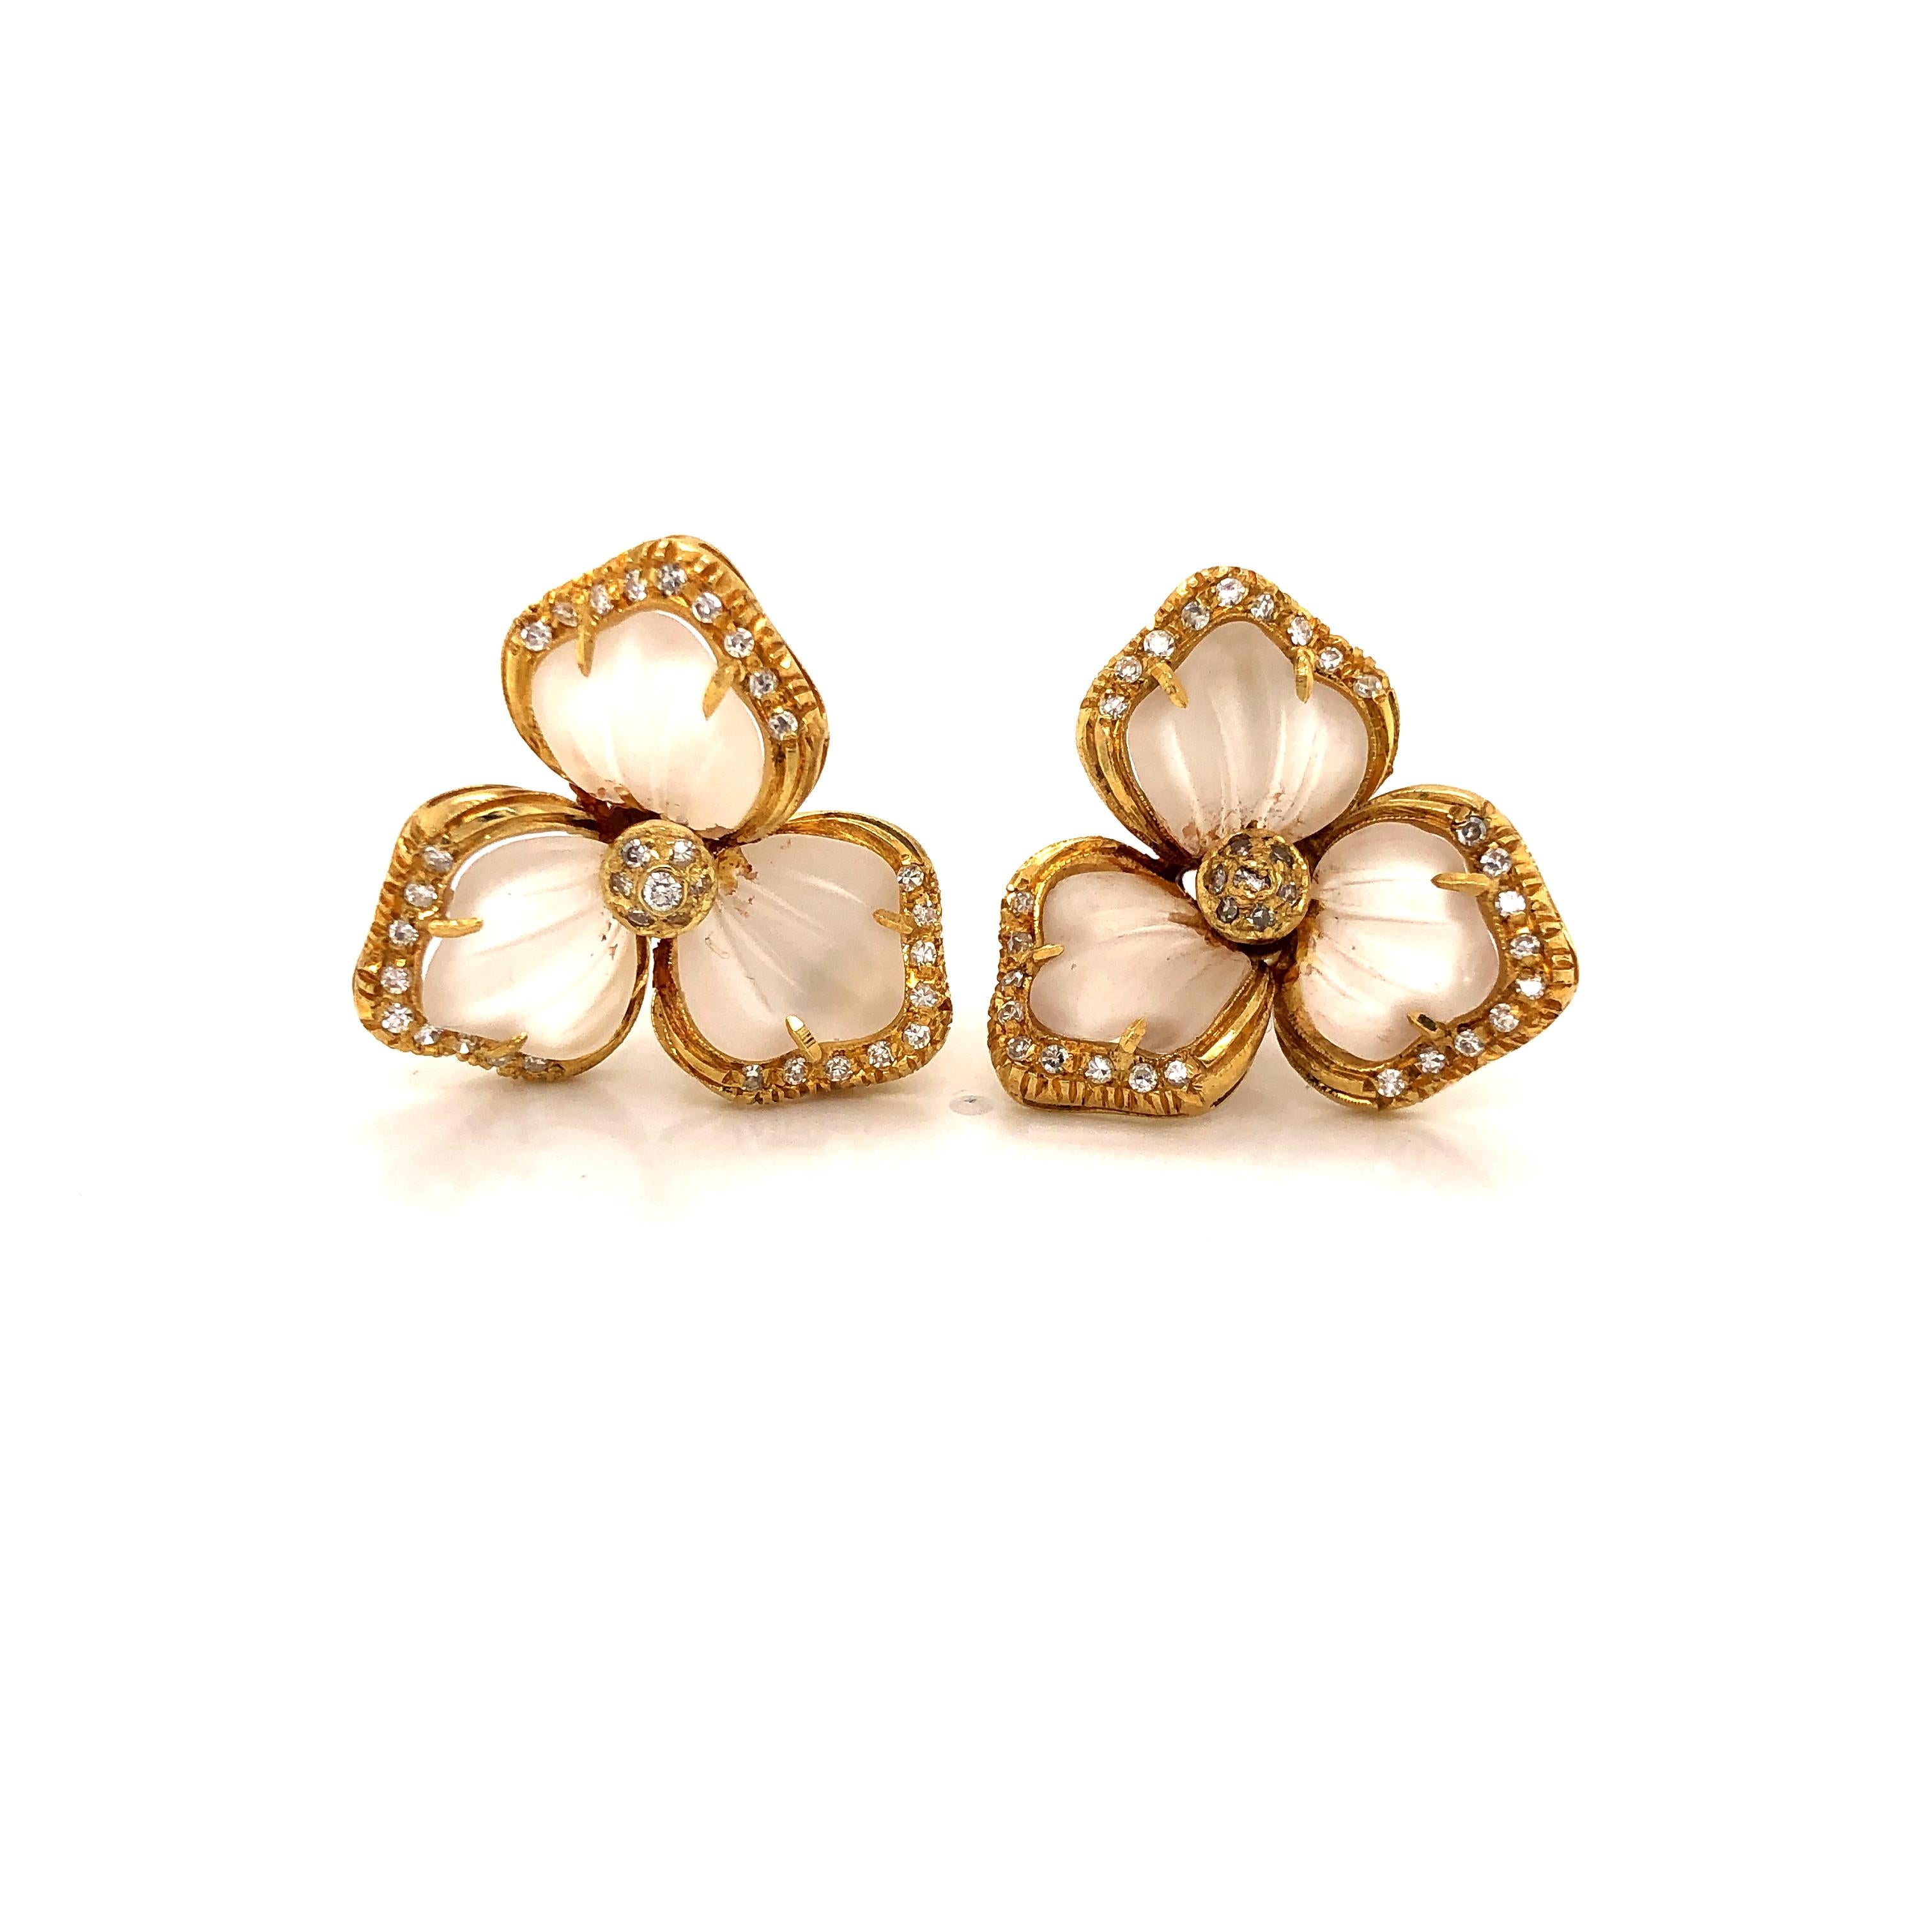 Amazing Italian design way ahead of its time. This flower motif set was hand crafted by master jewelers. Etched rock crystal quartz is craved into petals with exquisite details. Prong set with step cut diamonds set throughout. The 18k yellow gold is